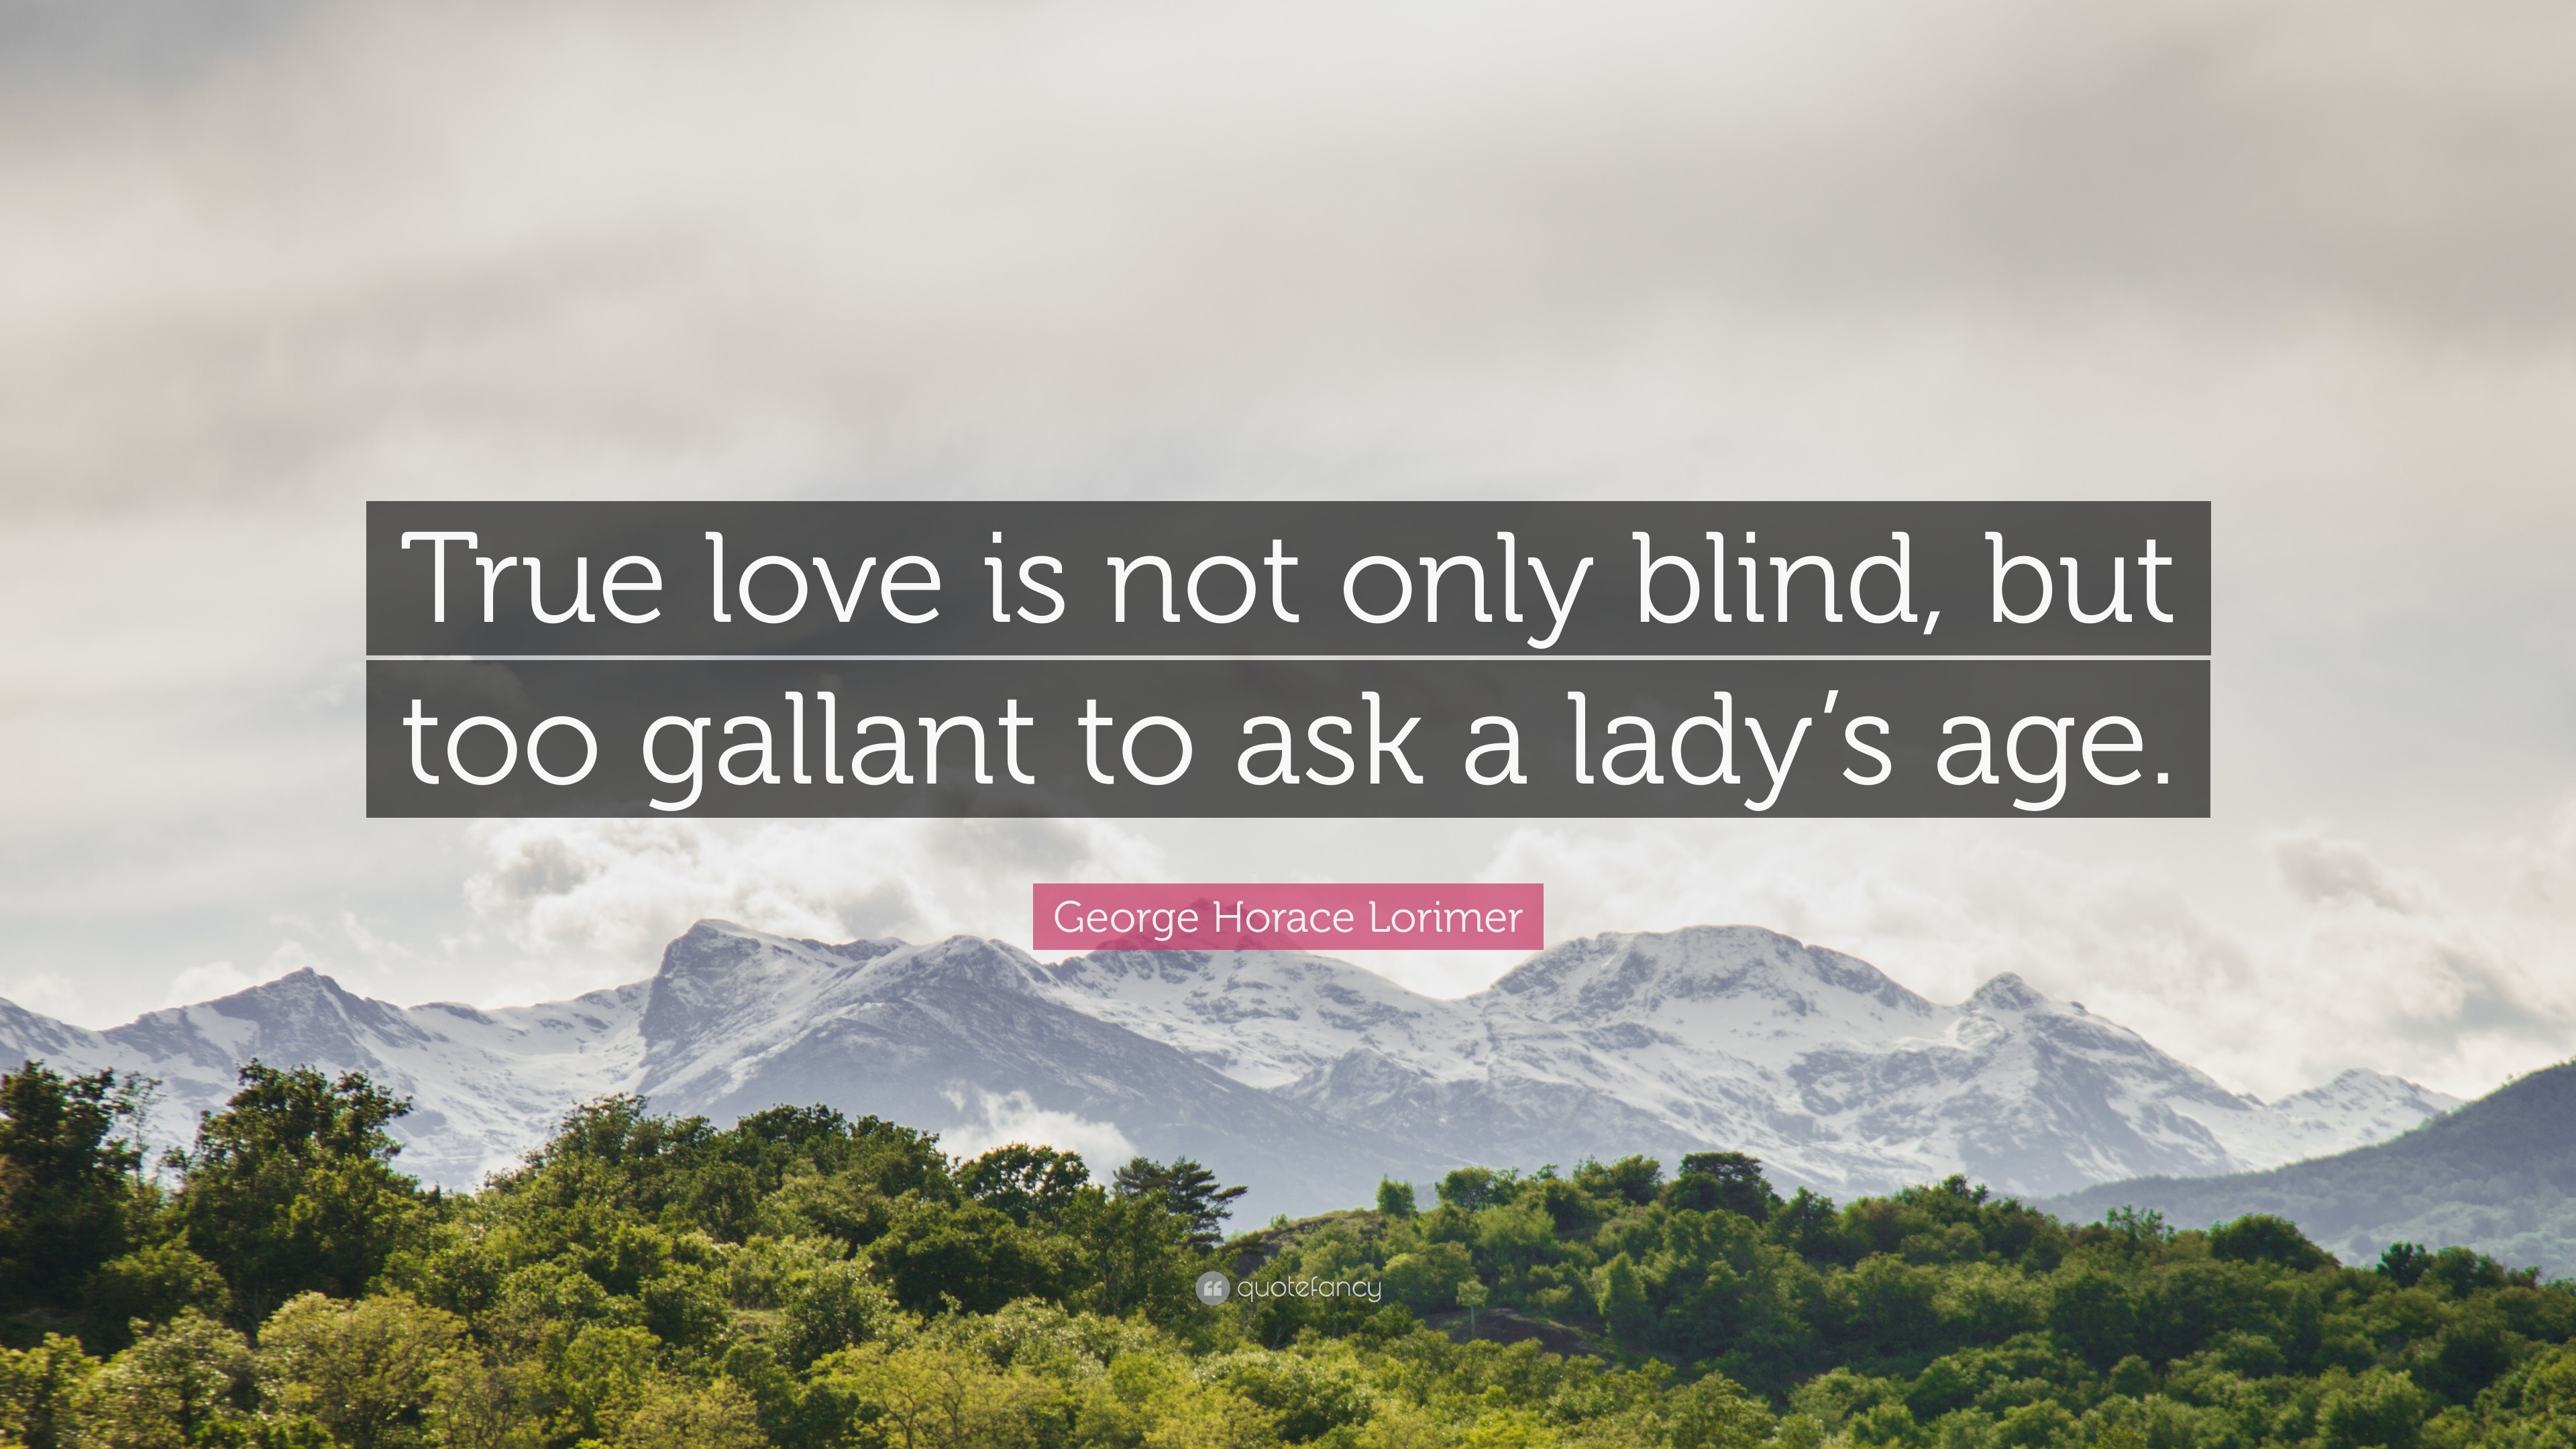 George Horace Lorimer Quote “True love is not only blind but too gallant